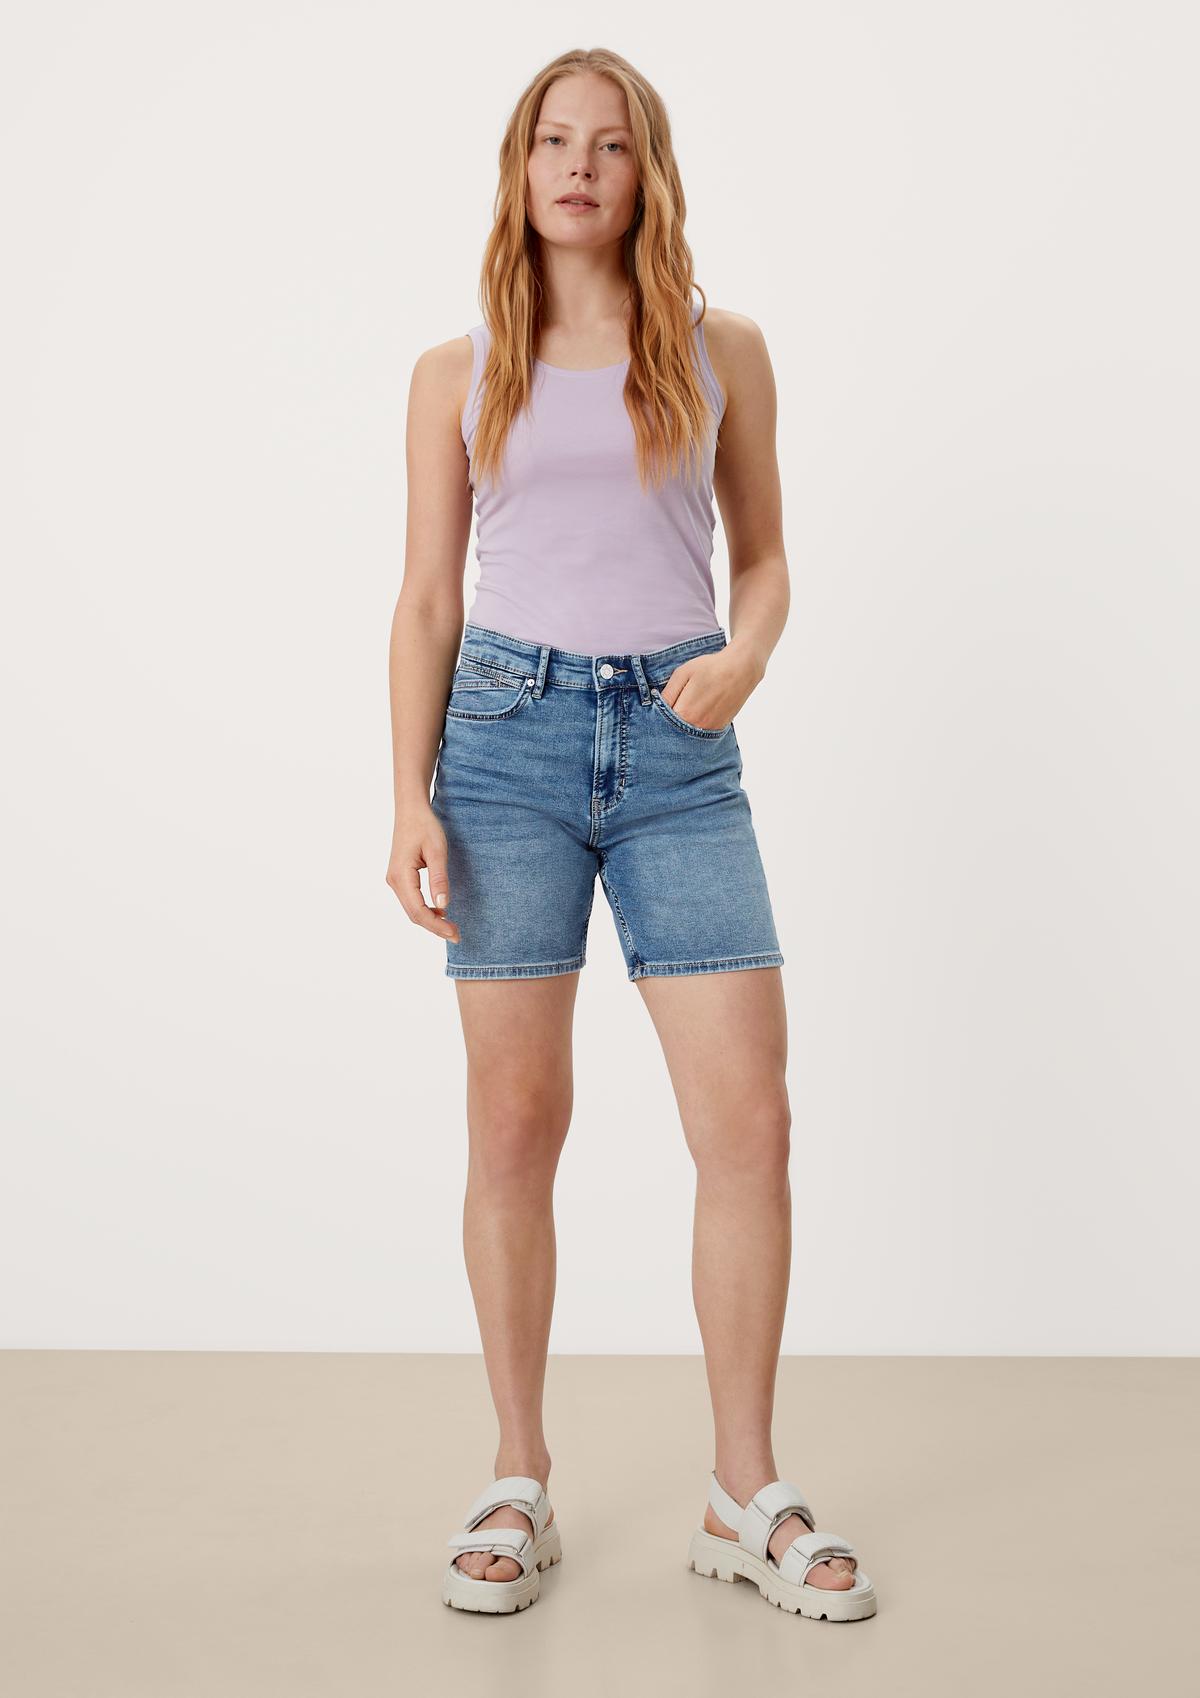 s.Oliver Jeans-Shorts Franciz / Relaxed Fit / Mid Rise / Straight Leg